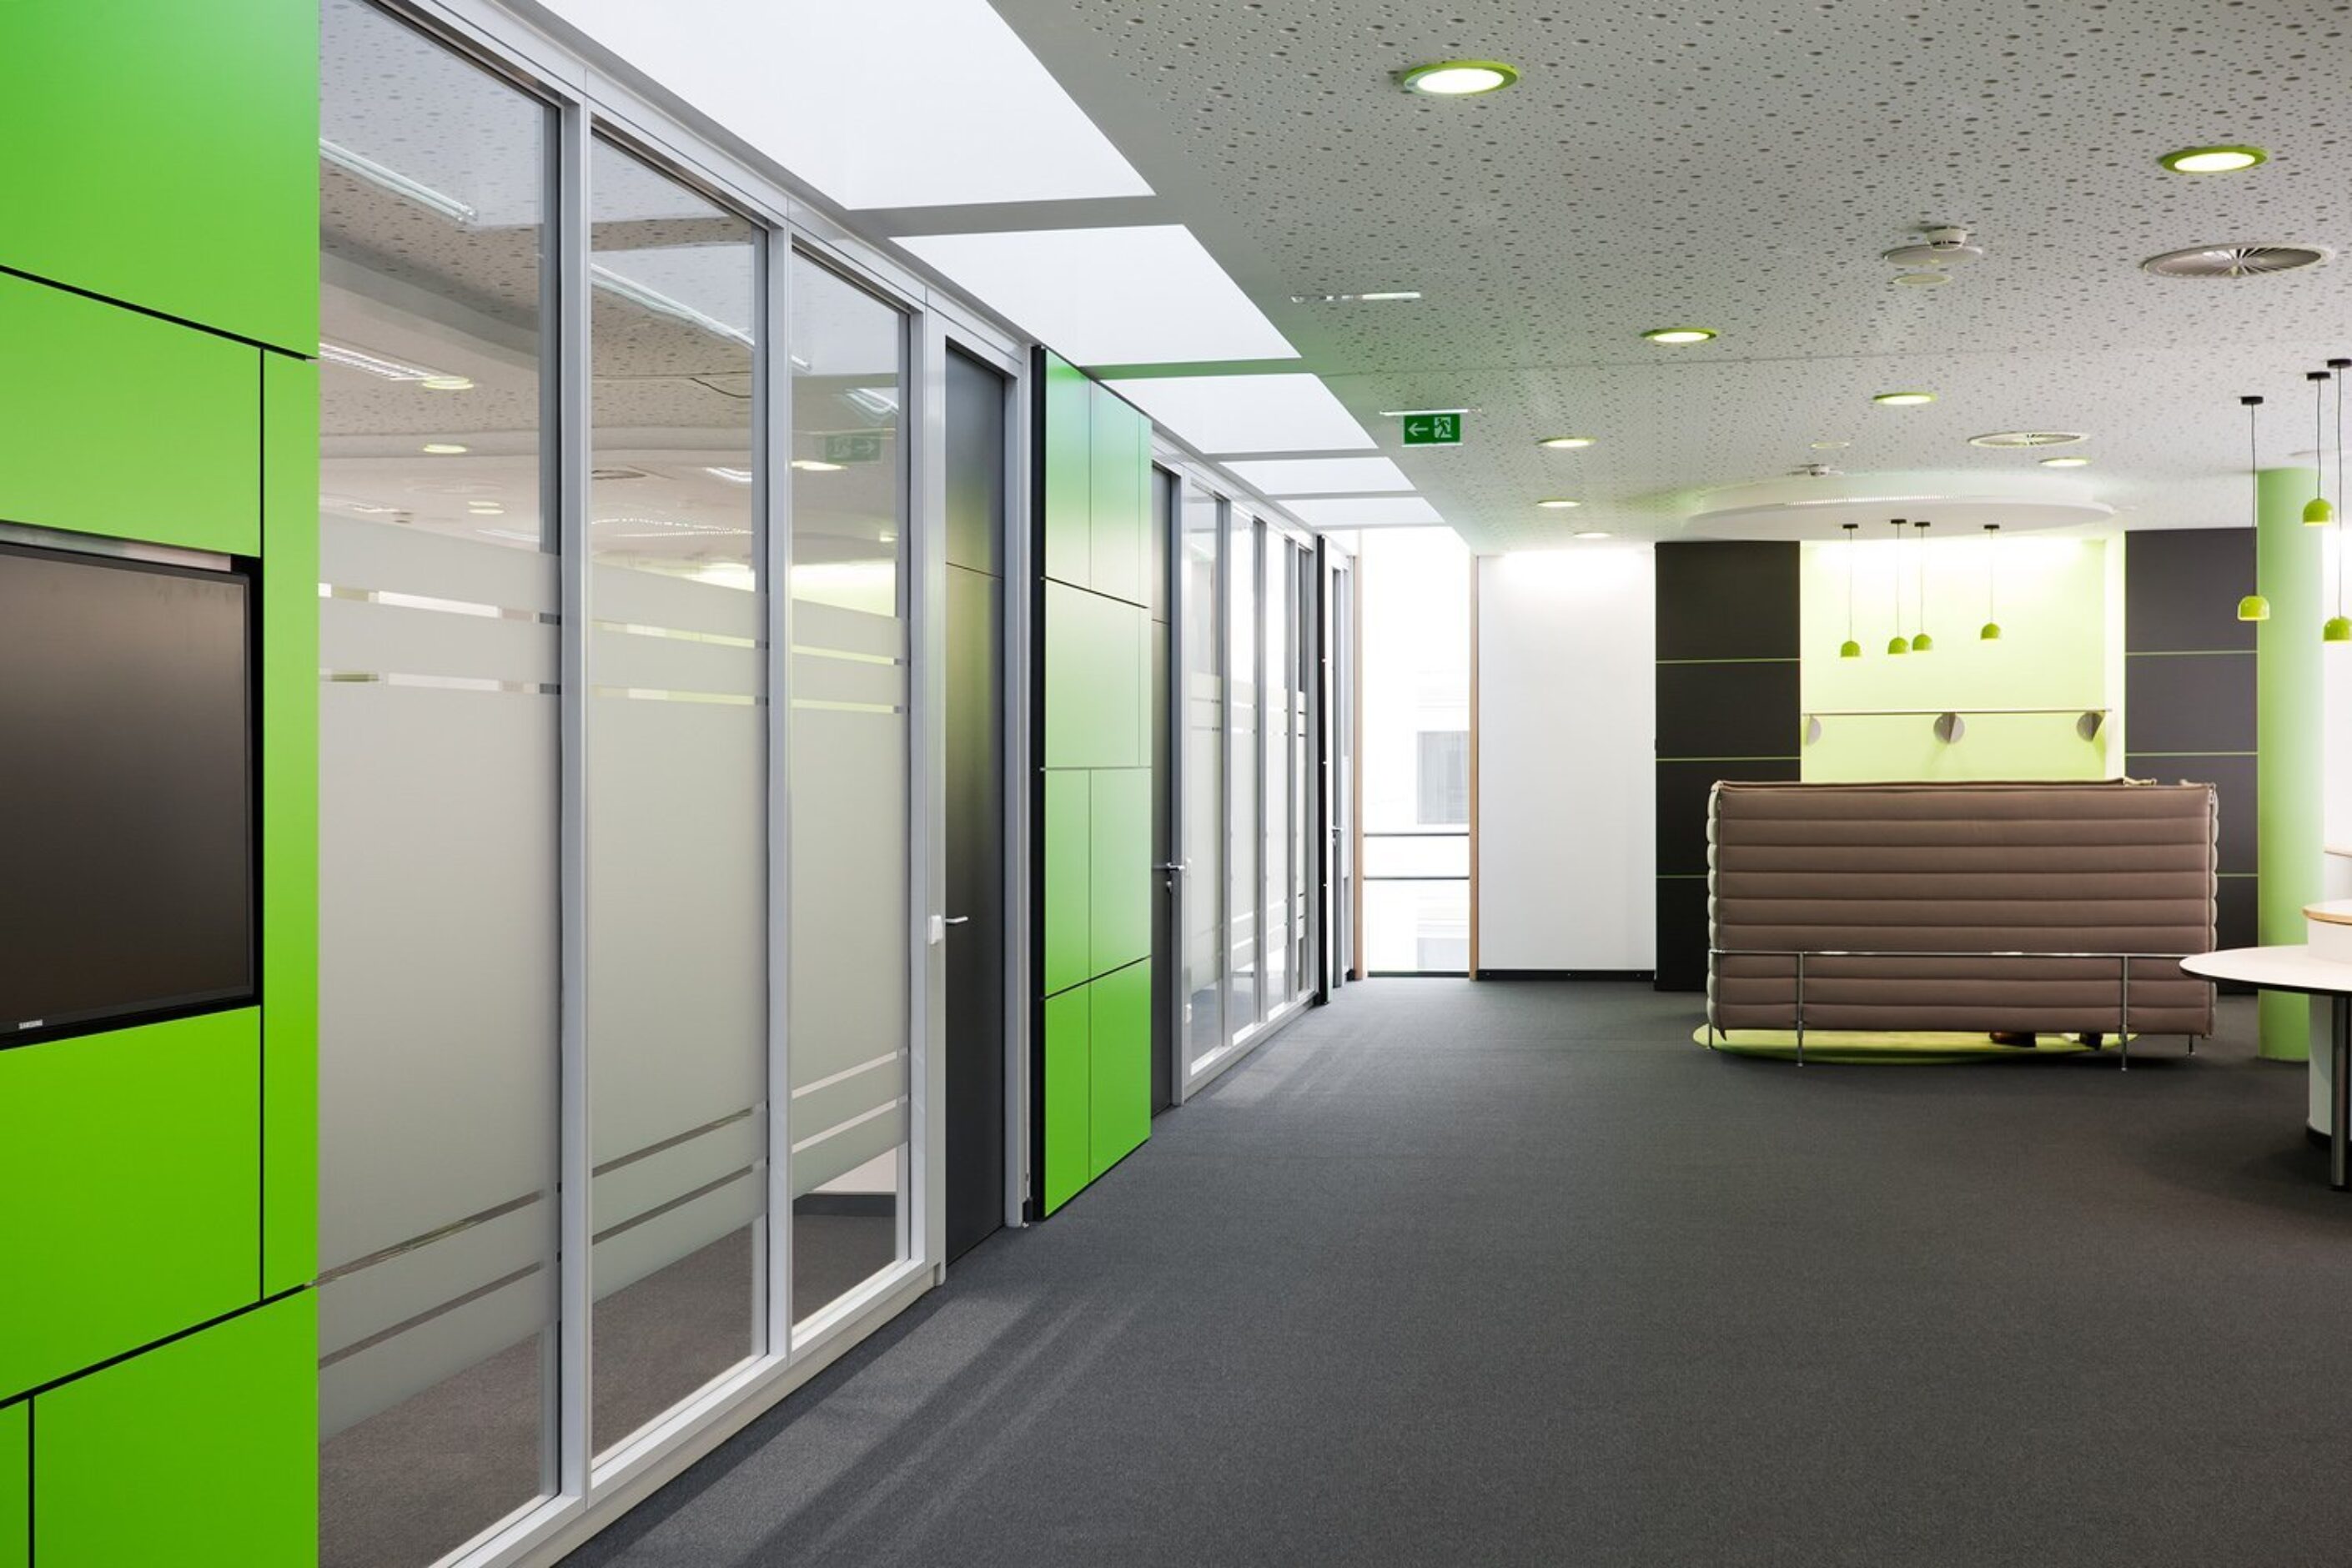 feco-feederle│office furniture Karlsruhe│partition wall systems│VBL, Karlsruhe